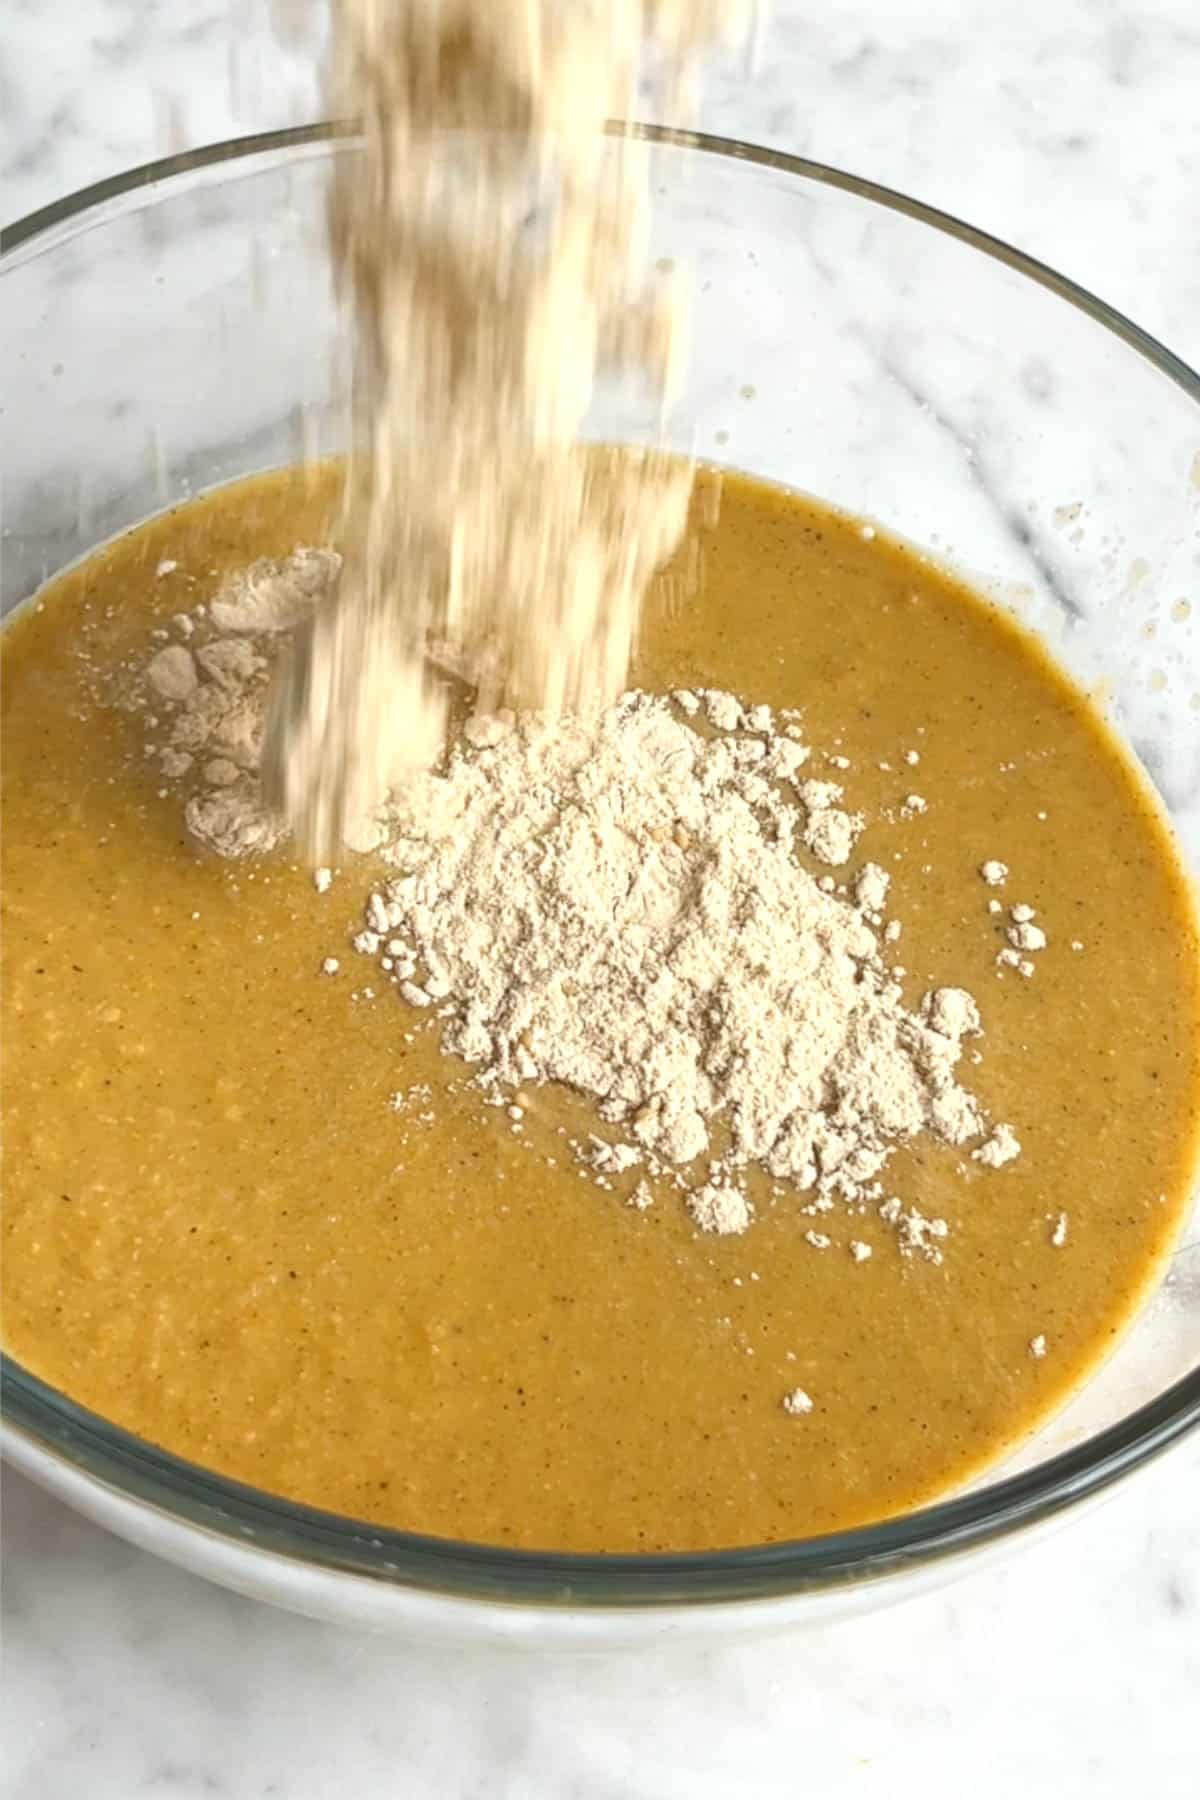 Blended mustard colored liquid with white flour dusted in top in a glass bowl.